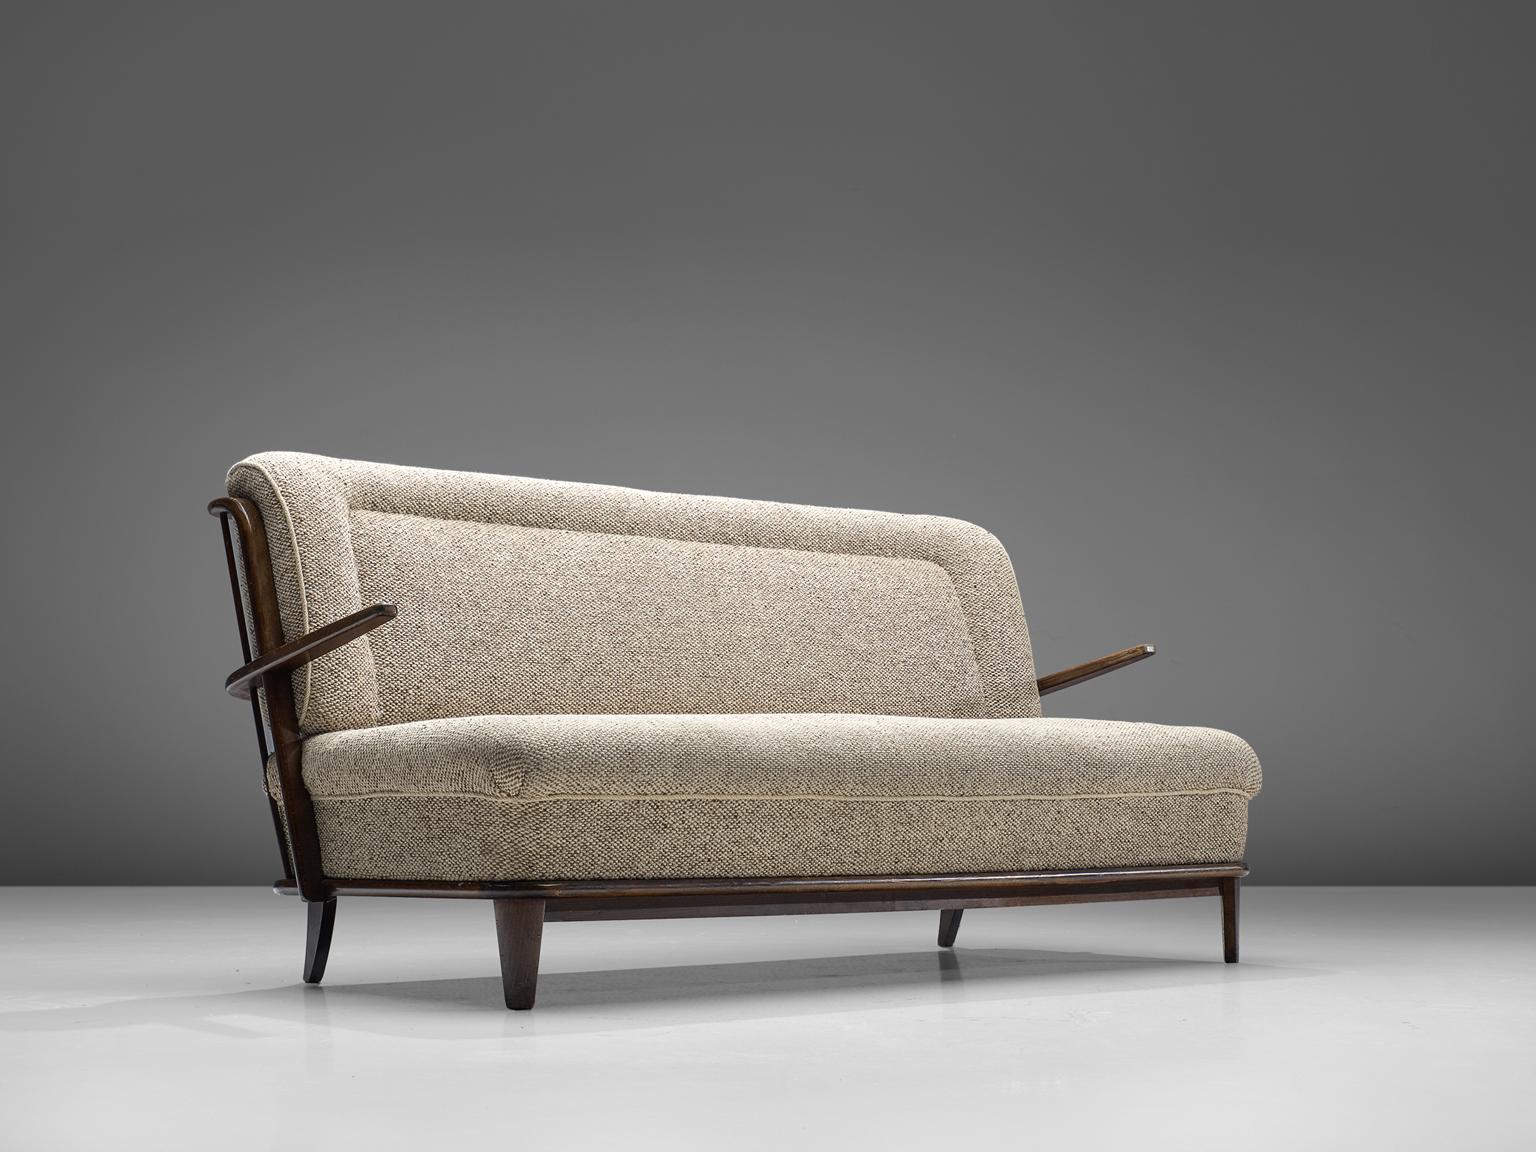 Sofa, fabric, wood, Denmark, 1950s

This small sofa has various interesting details that make sure this piece will stand out without being ostentatious. The piece is therefore very Danish in its design. The back of the sofa shows vertical slats and